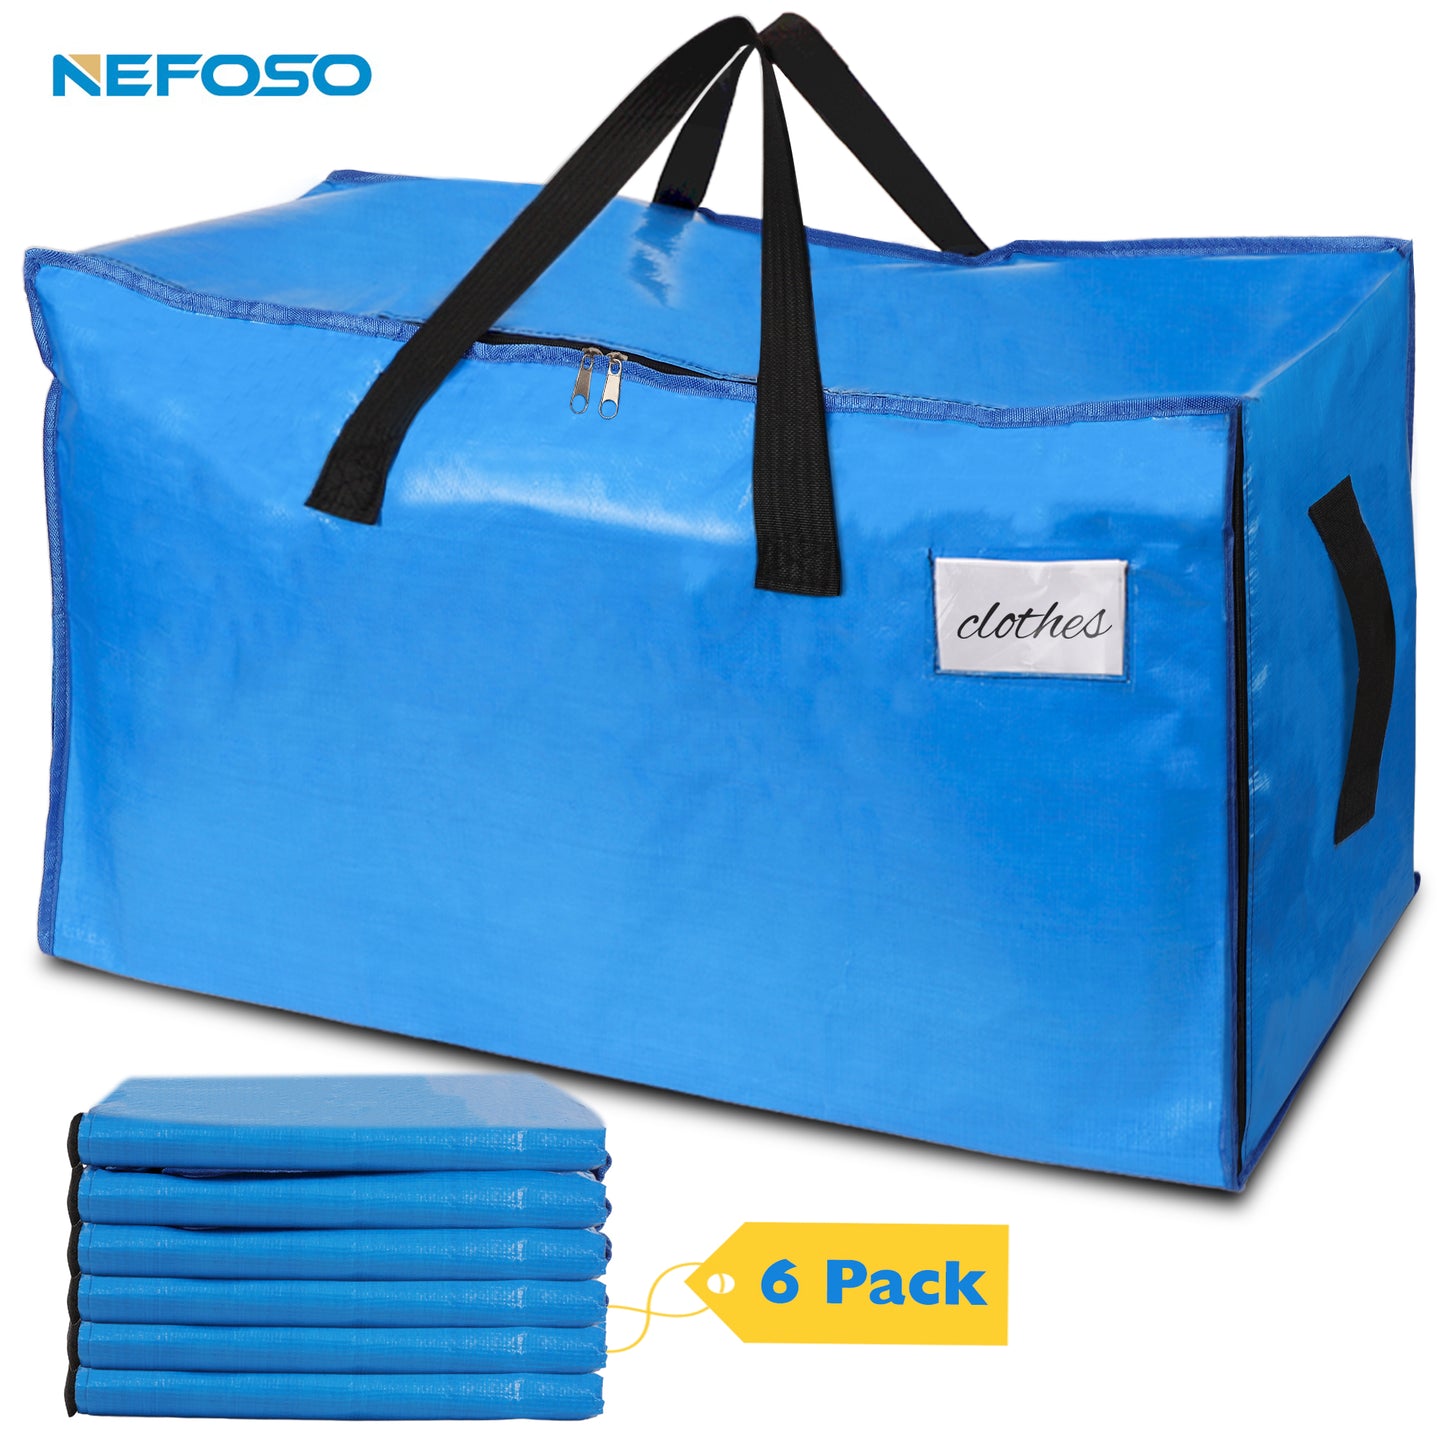 Extra Large Storage Bags